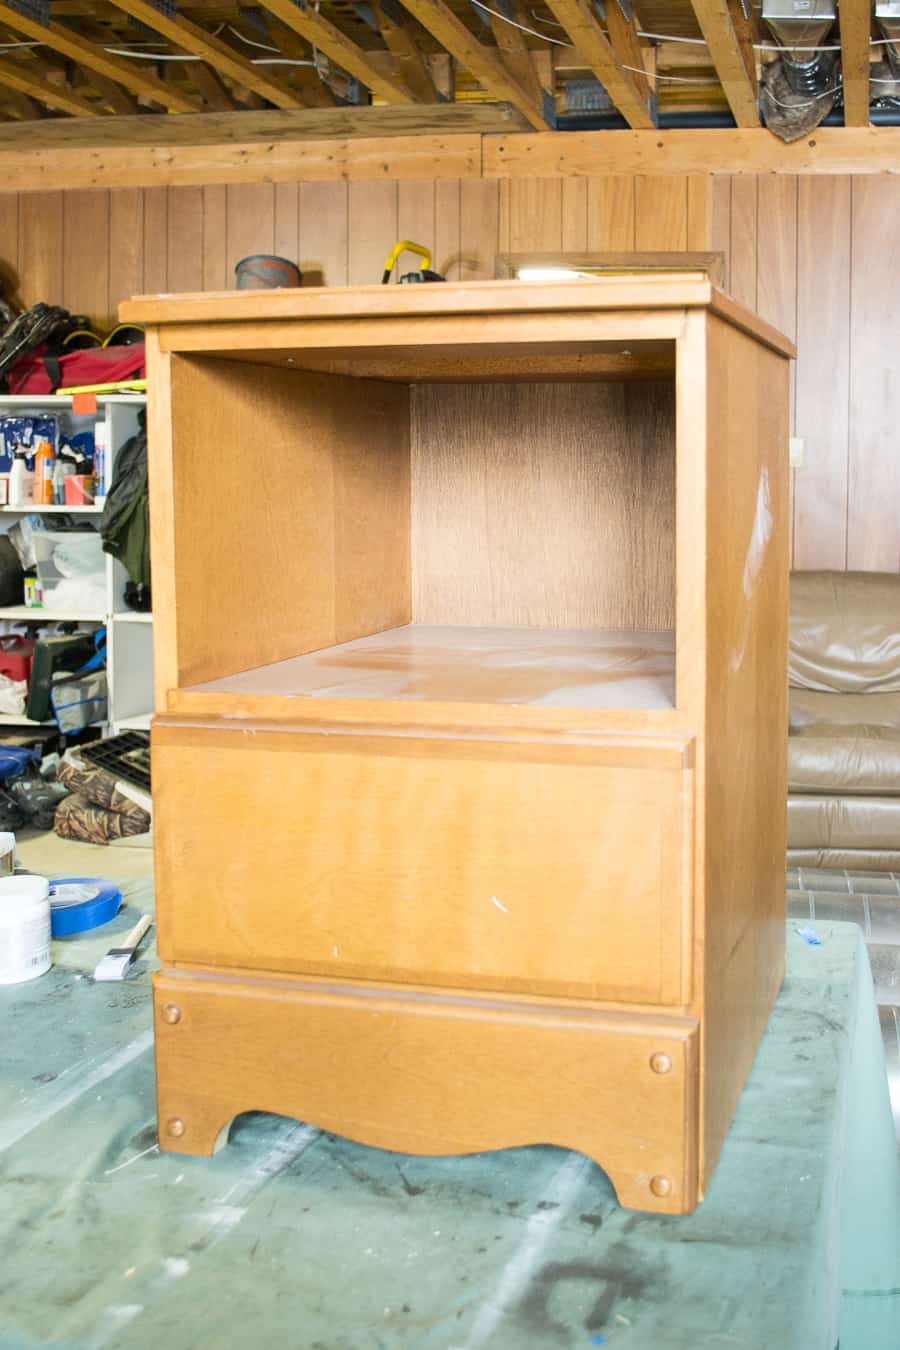 Take an old piece of furniture and begin sanding to clean off any old or dirty grime to prepare for a makeover